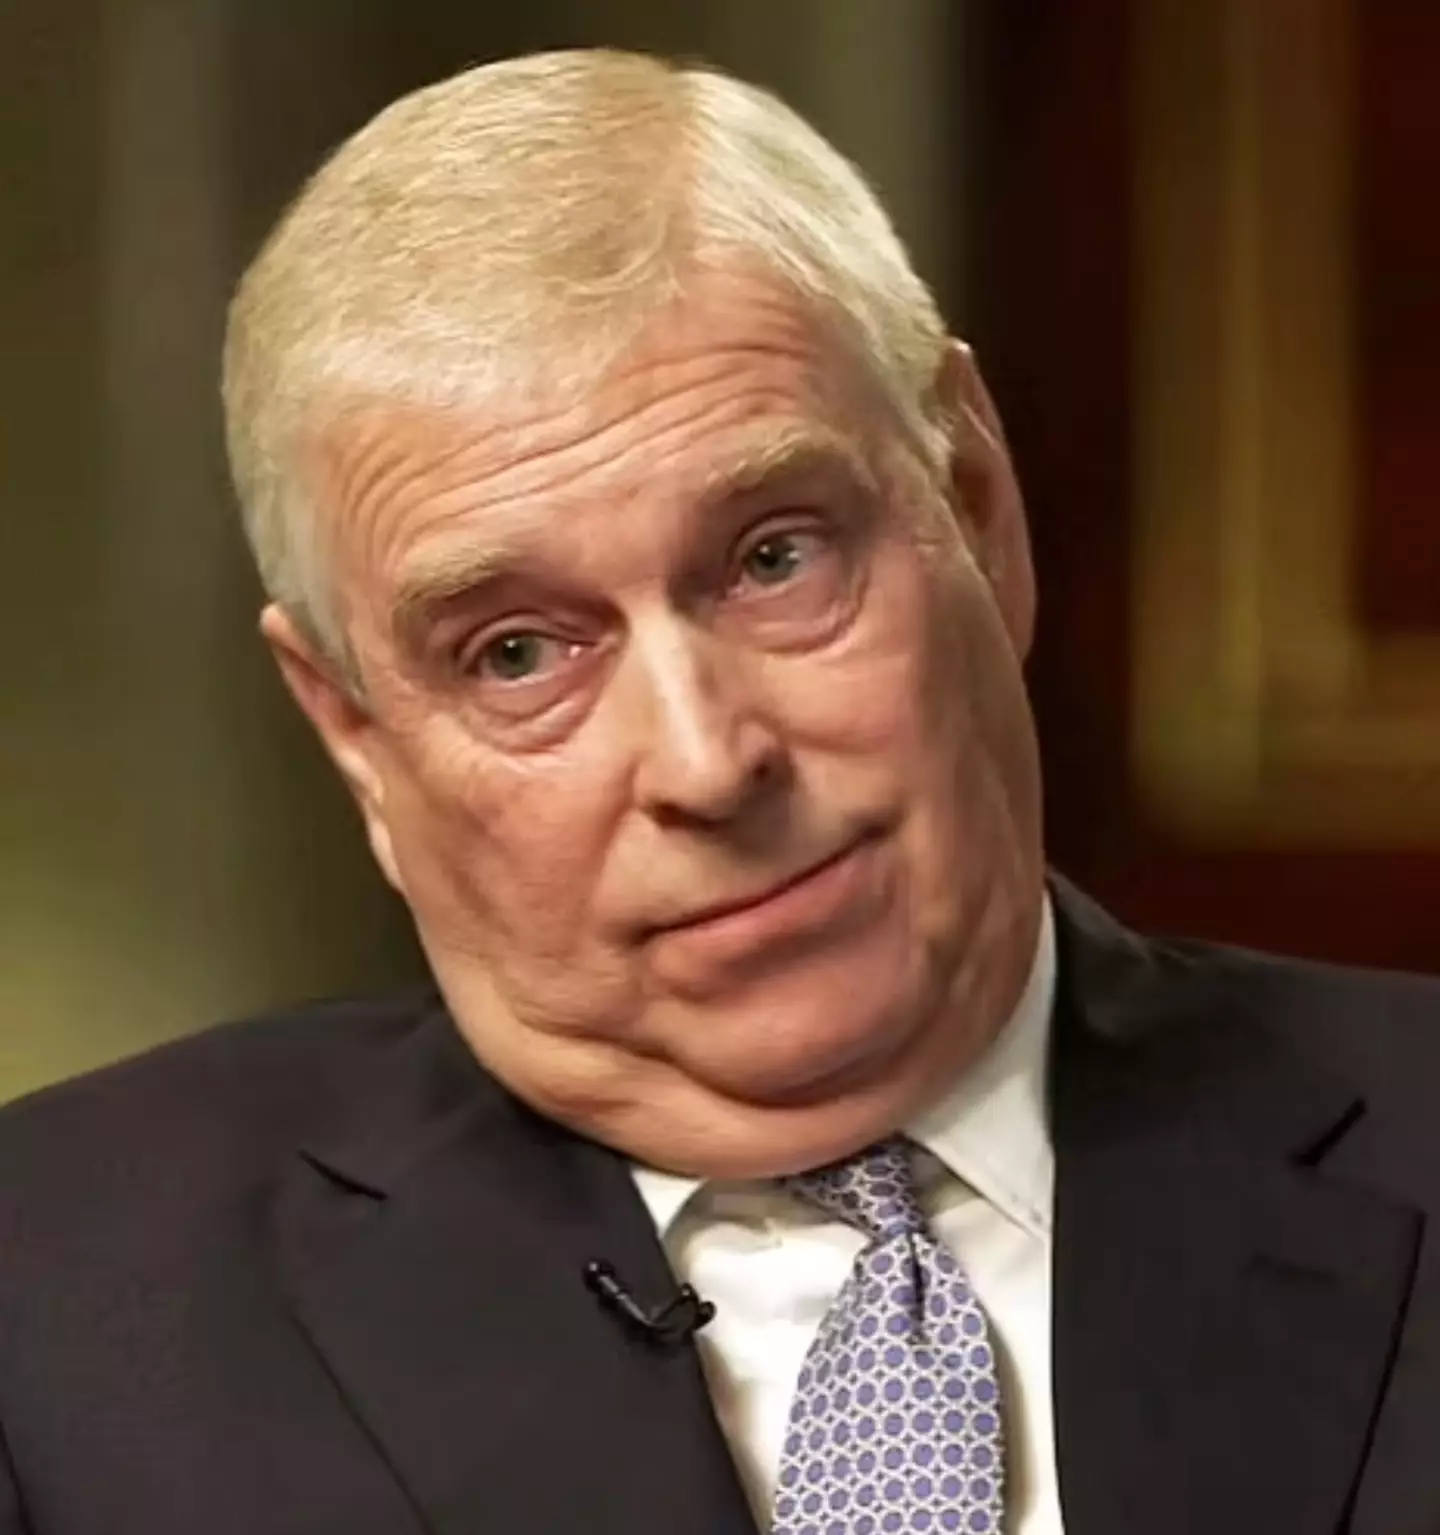 A photographer claims to have an embarrassing photo of Prince Andrew.